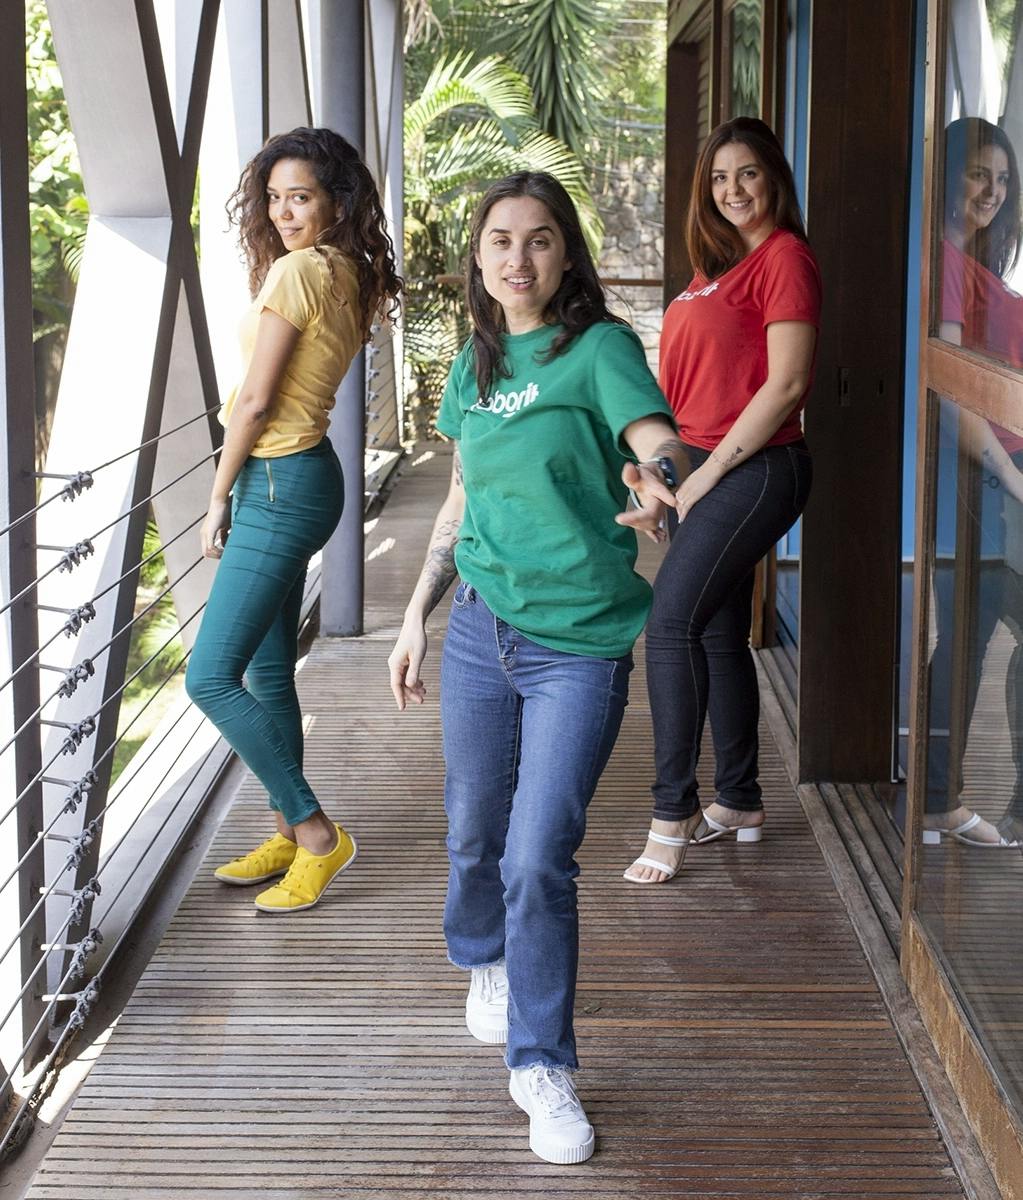 At Lab, women stand out in all areas. From left to right: Rhaysa Ferreira (Growth Marketing), Natalia De Marco (Designer) and Marcela Machado (Product Manager).